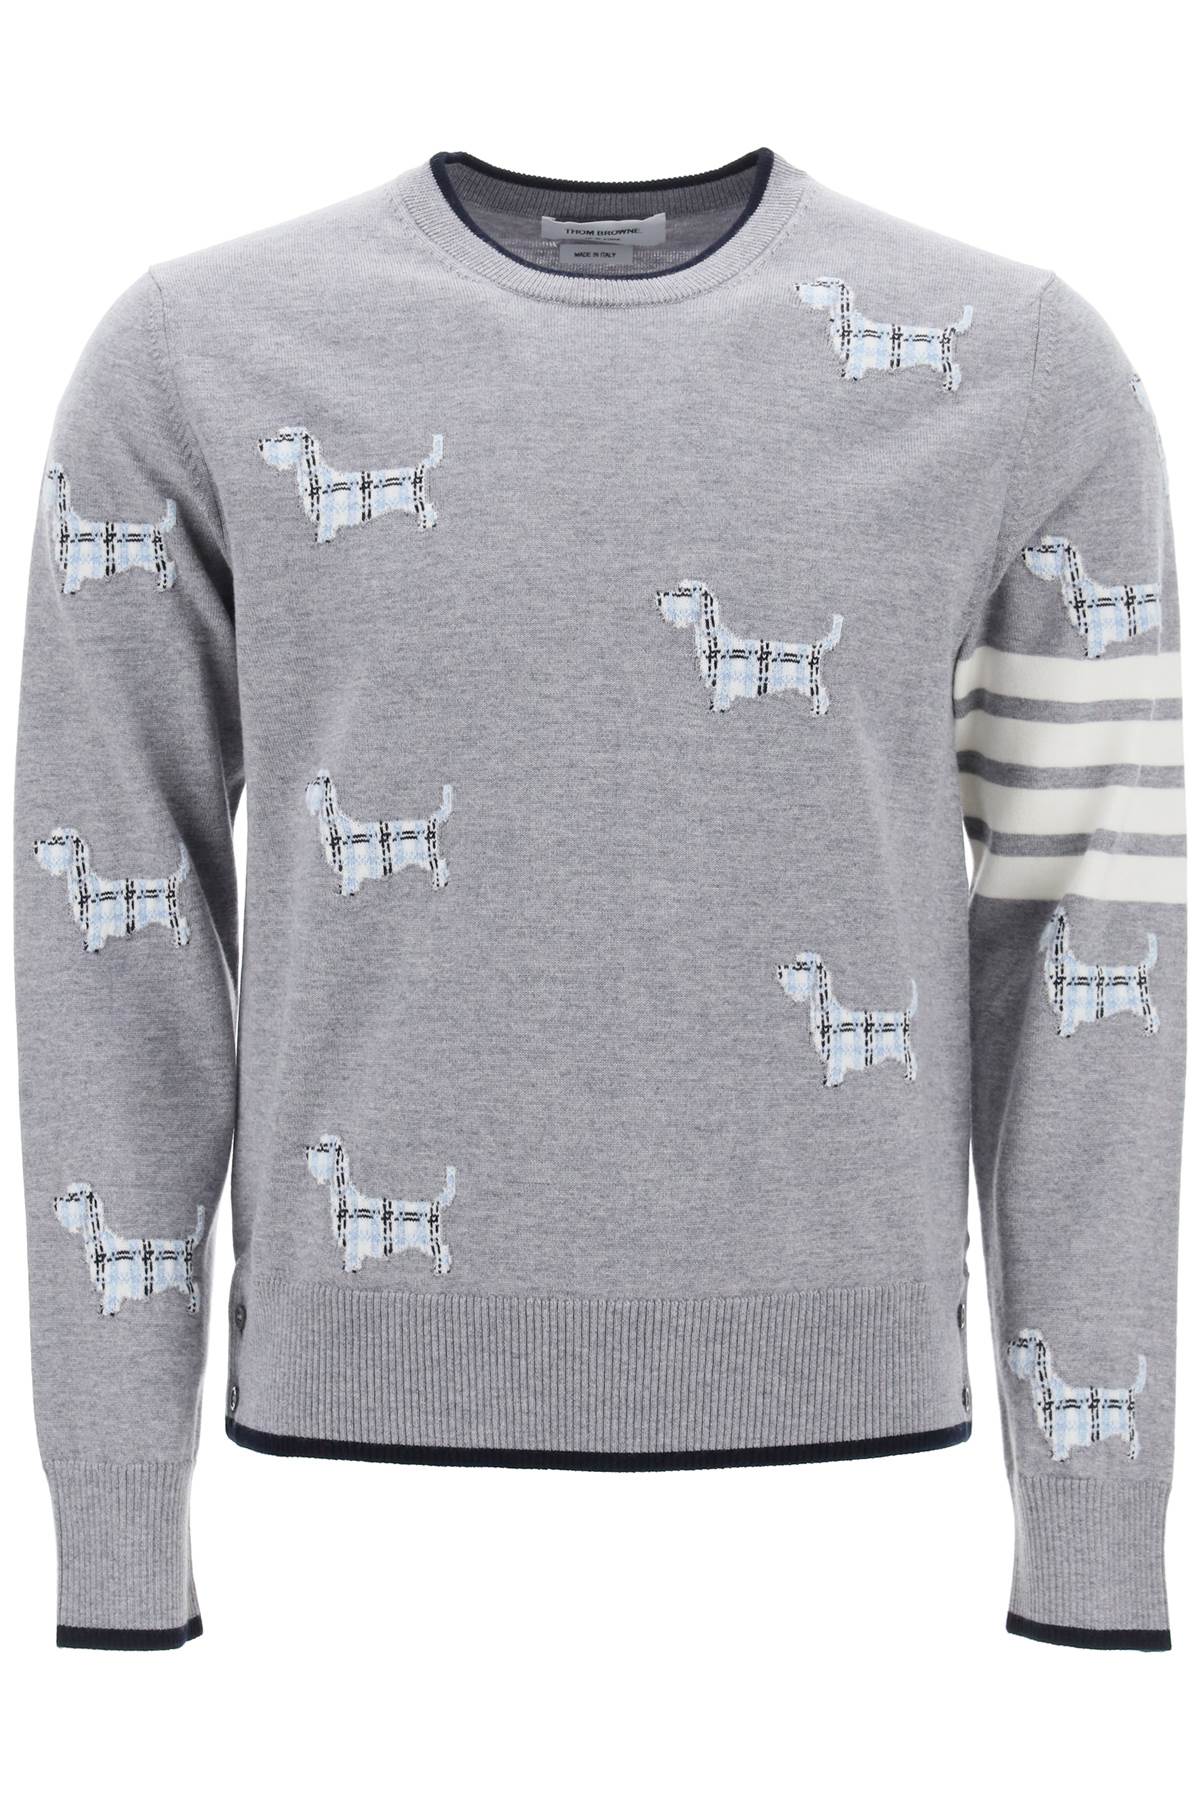 THOM BROWNE 4 BAR SWEATER WITH HECTOR PATTERN